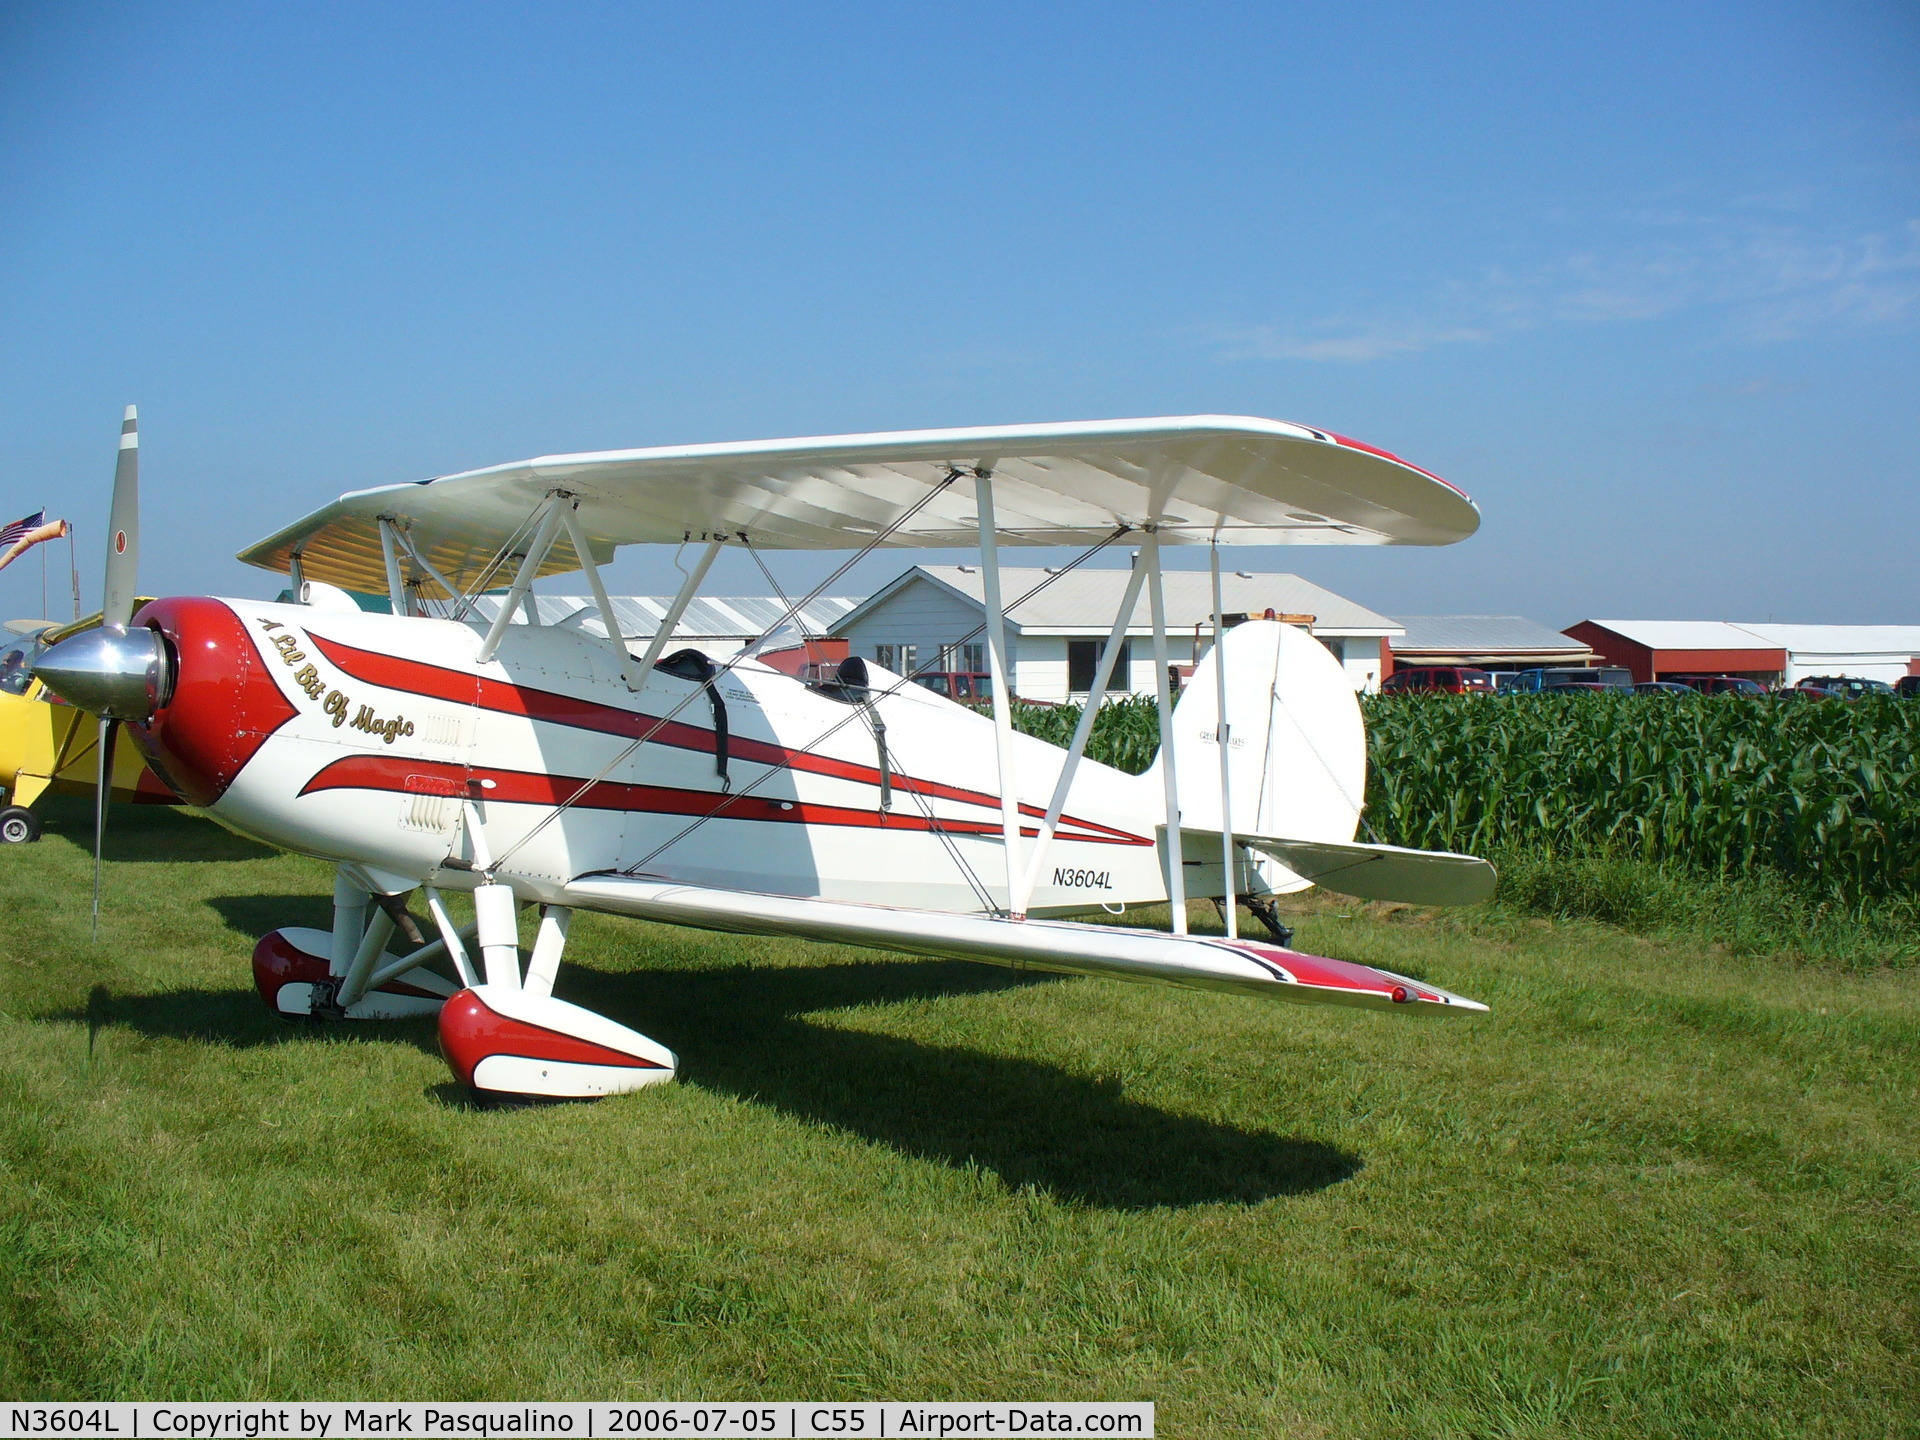 N3604L, 1978 Great Lakes 2T-1A-2 Sport Trainer C/N 0812, Great Lakes